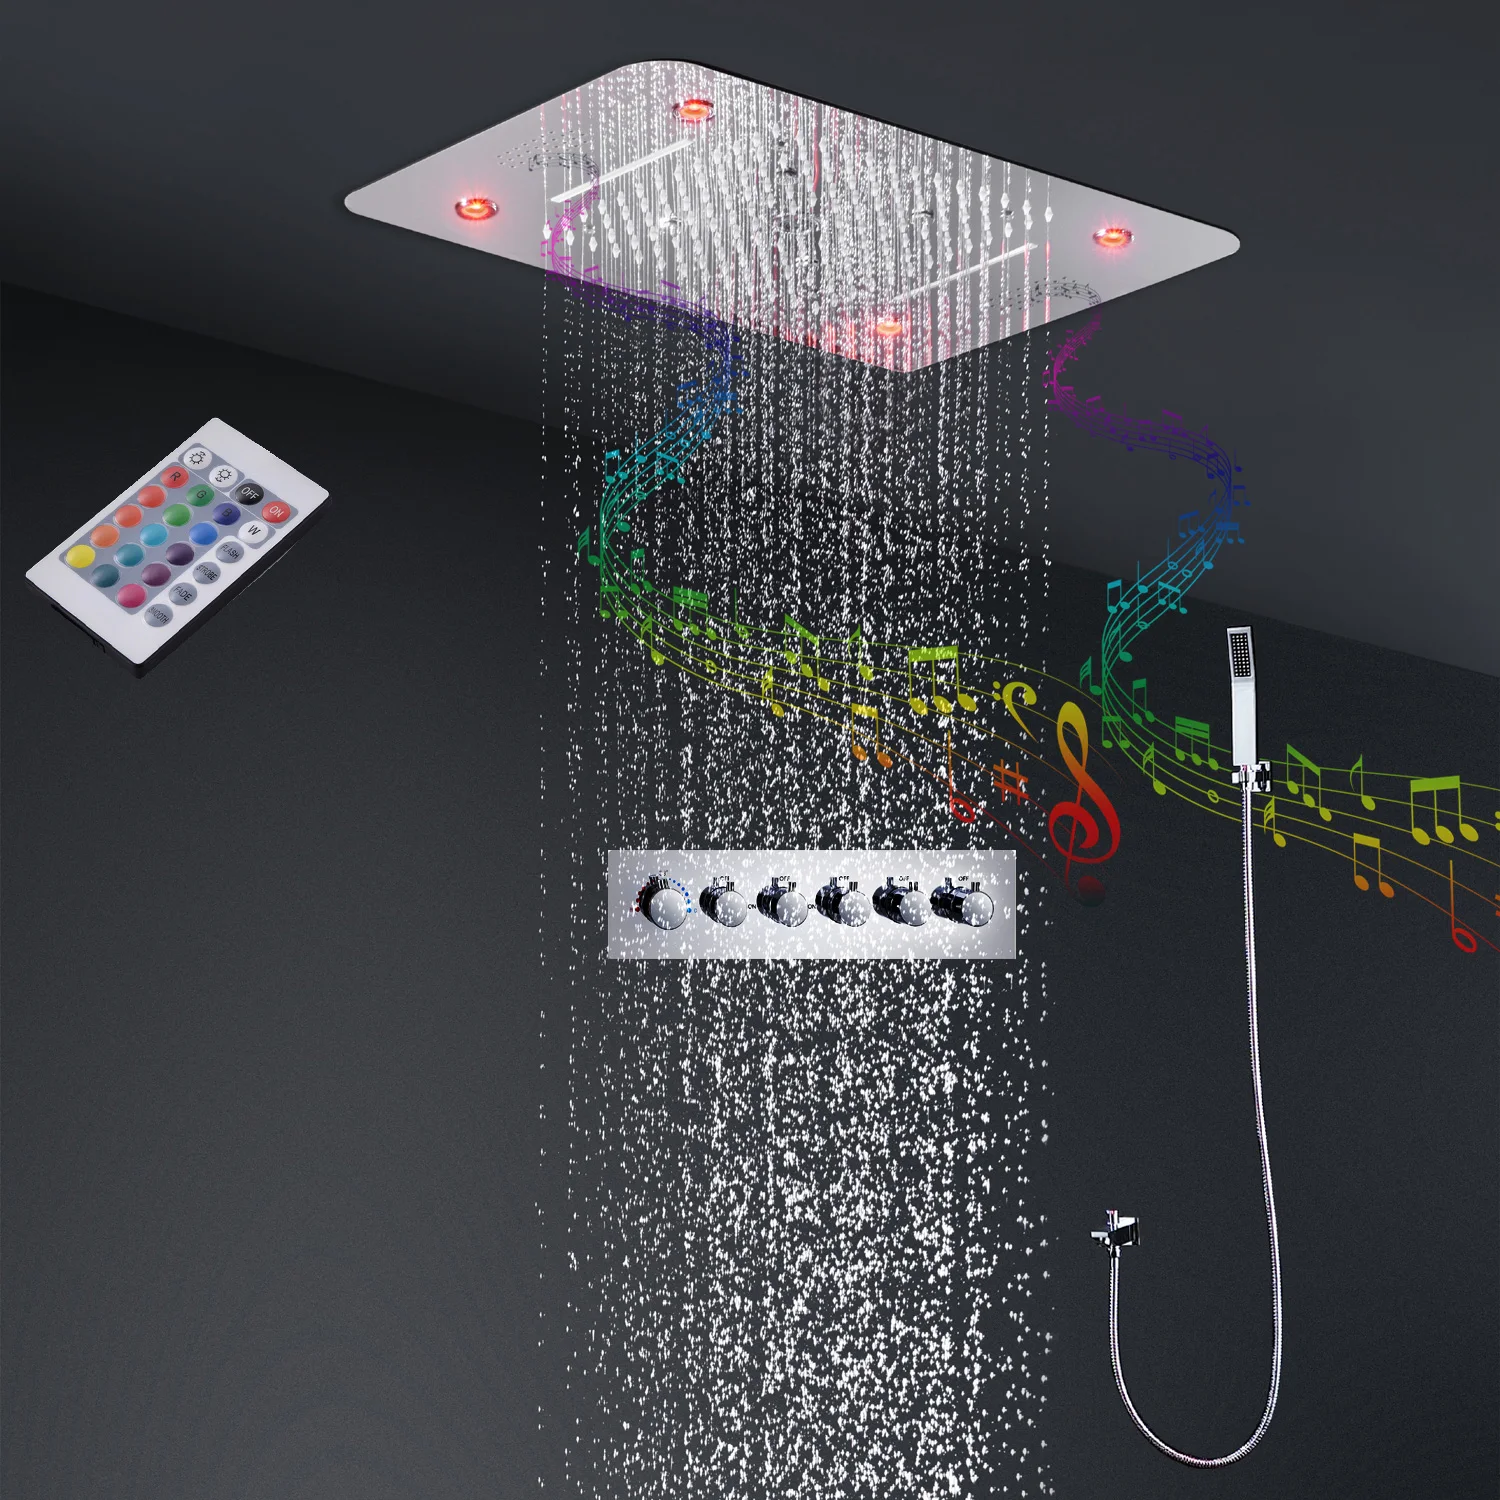 

hm Bluetooth Music Shower Set Bathroom Ceiling Coloful LED Rainfall Showerhead Panel Misty Waterfall Thermostatic Faucet System